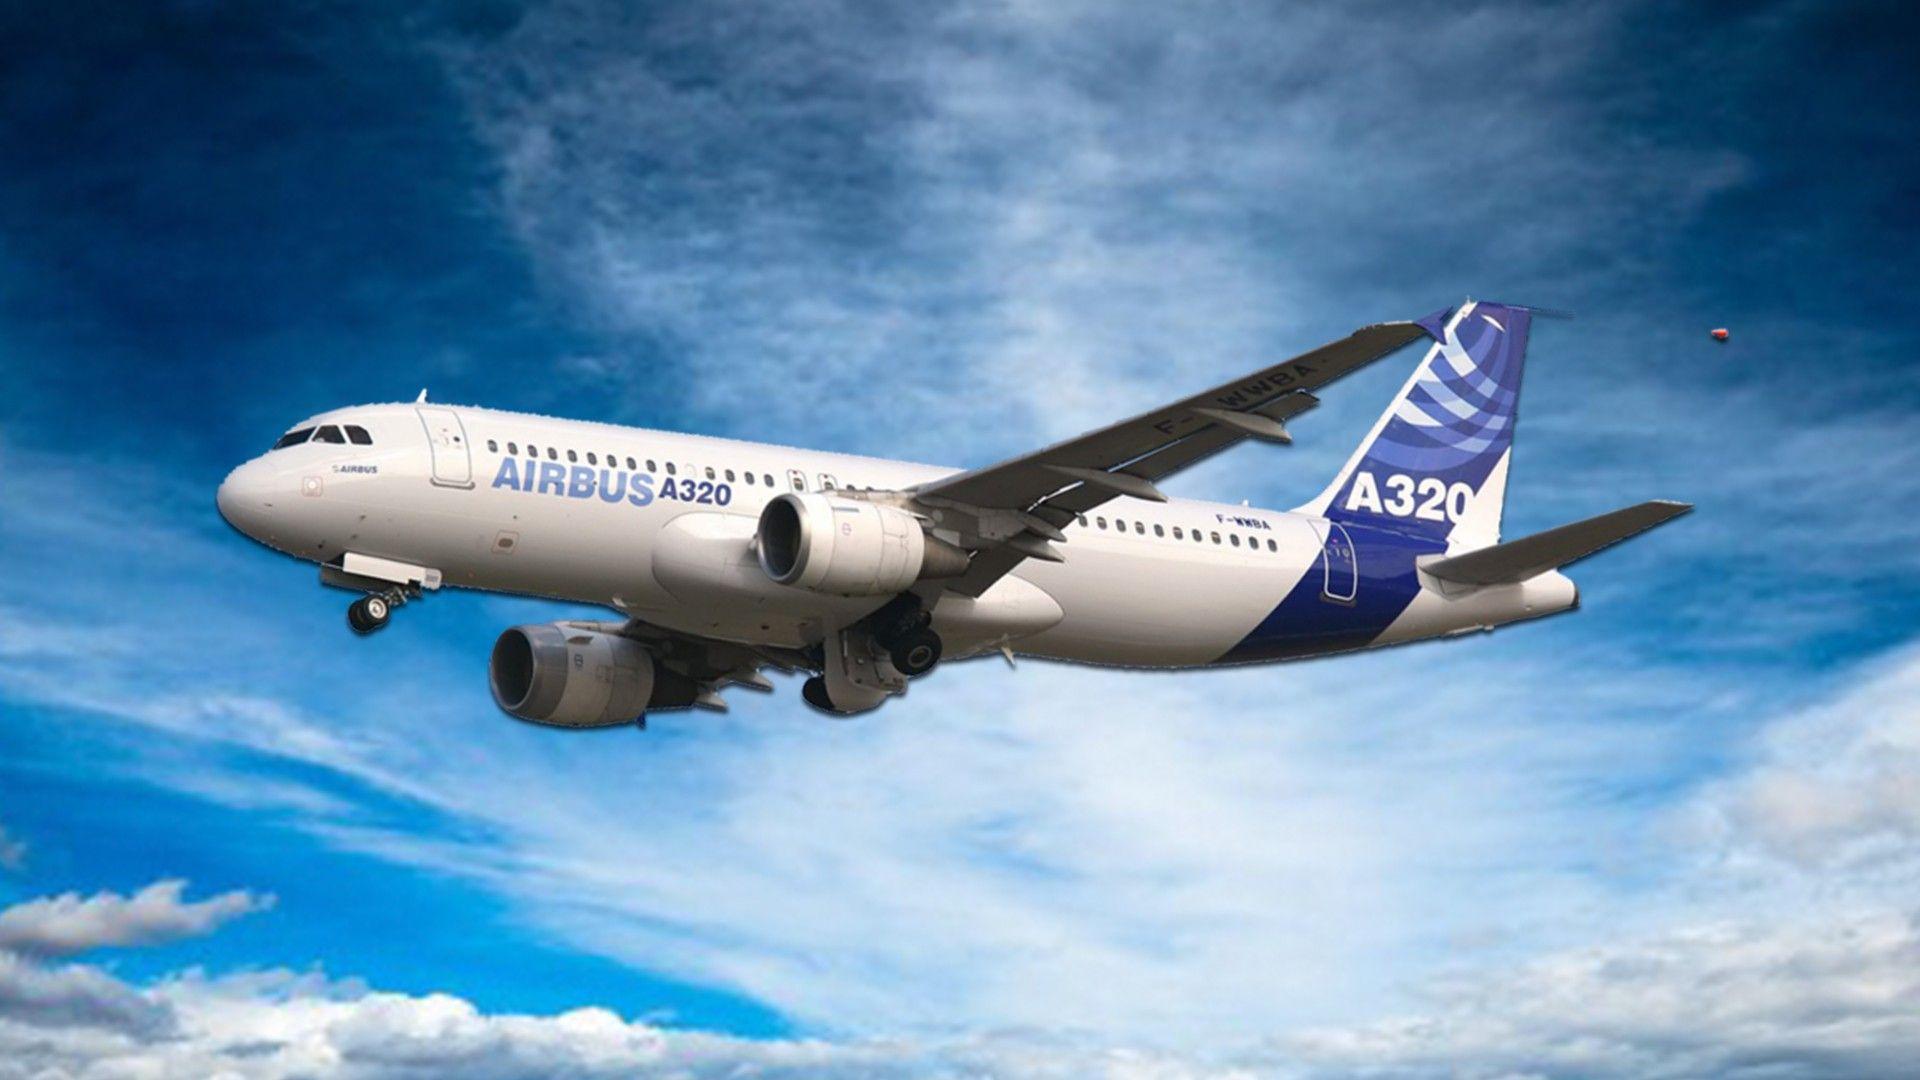 Airbus Photos Download The BEST Free Airbus Stock Photos  HD Images